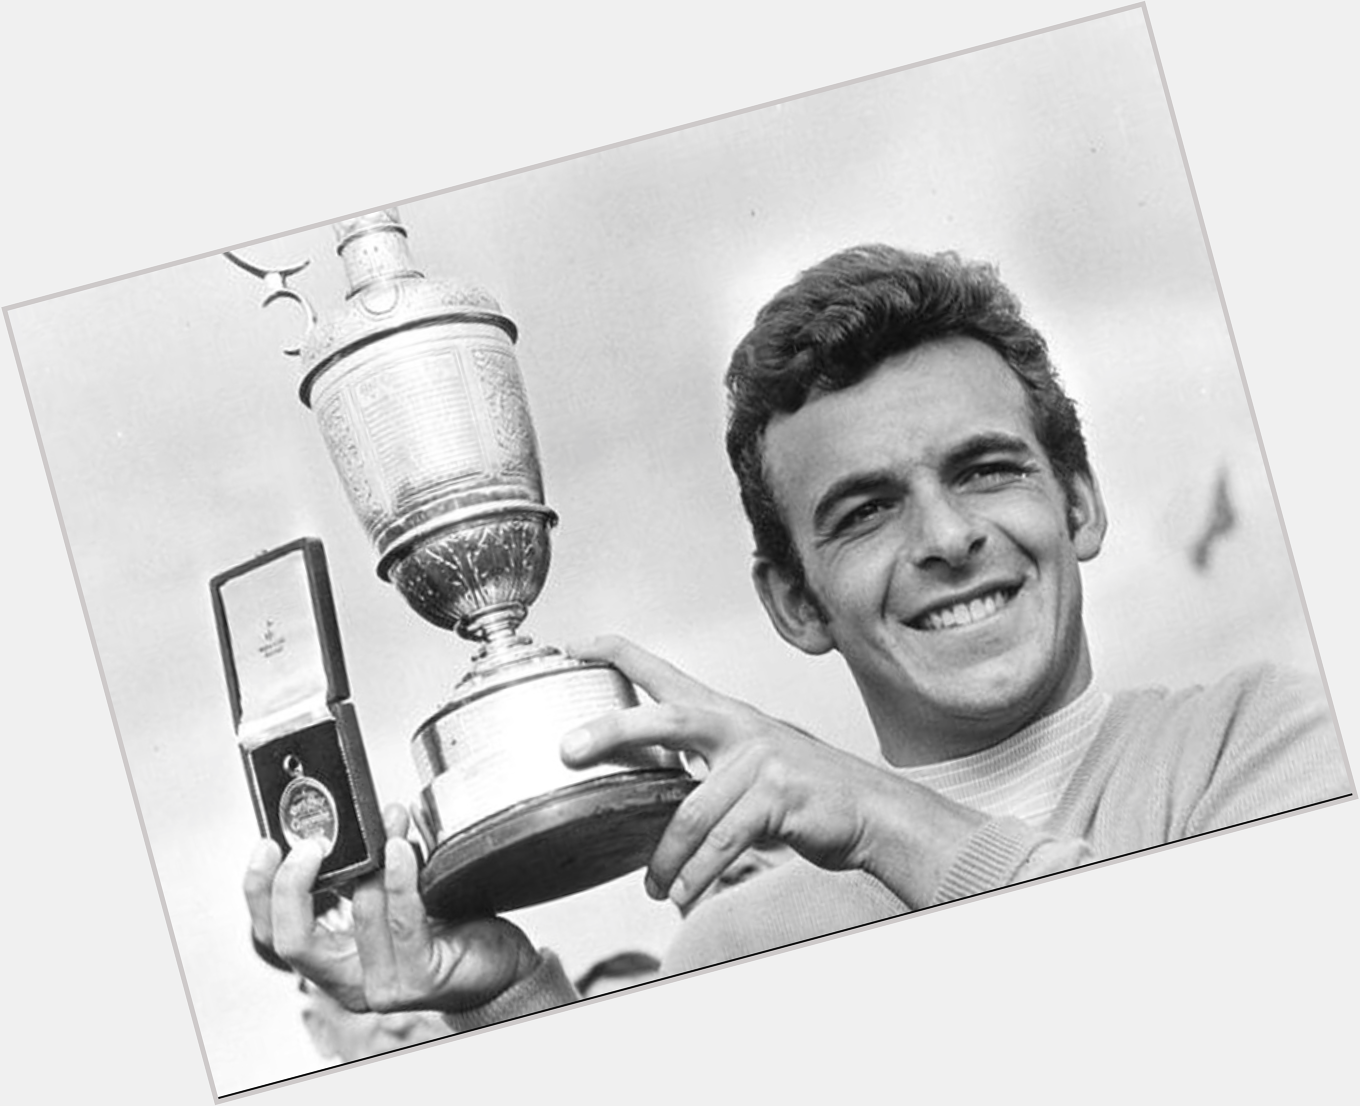 A very happy birthday to the legend that is Tony Jacklin!!!!!! 